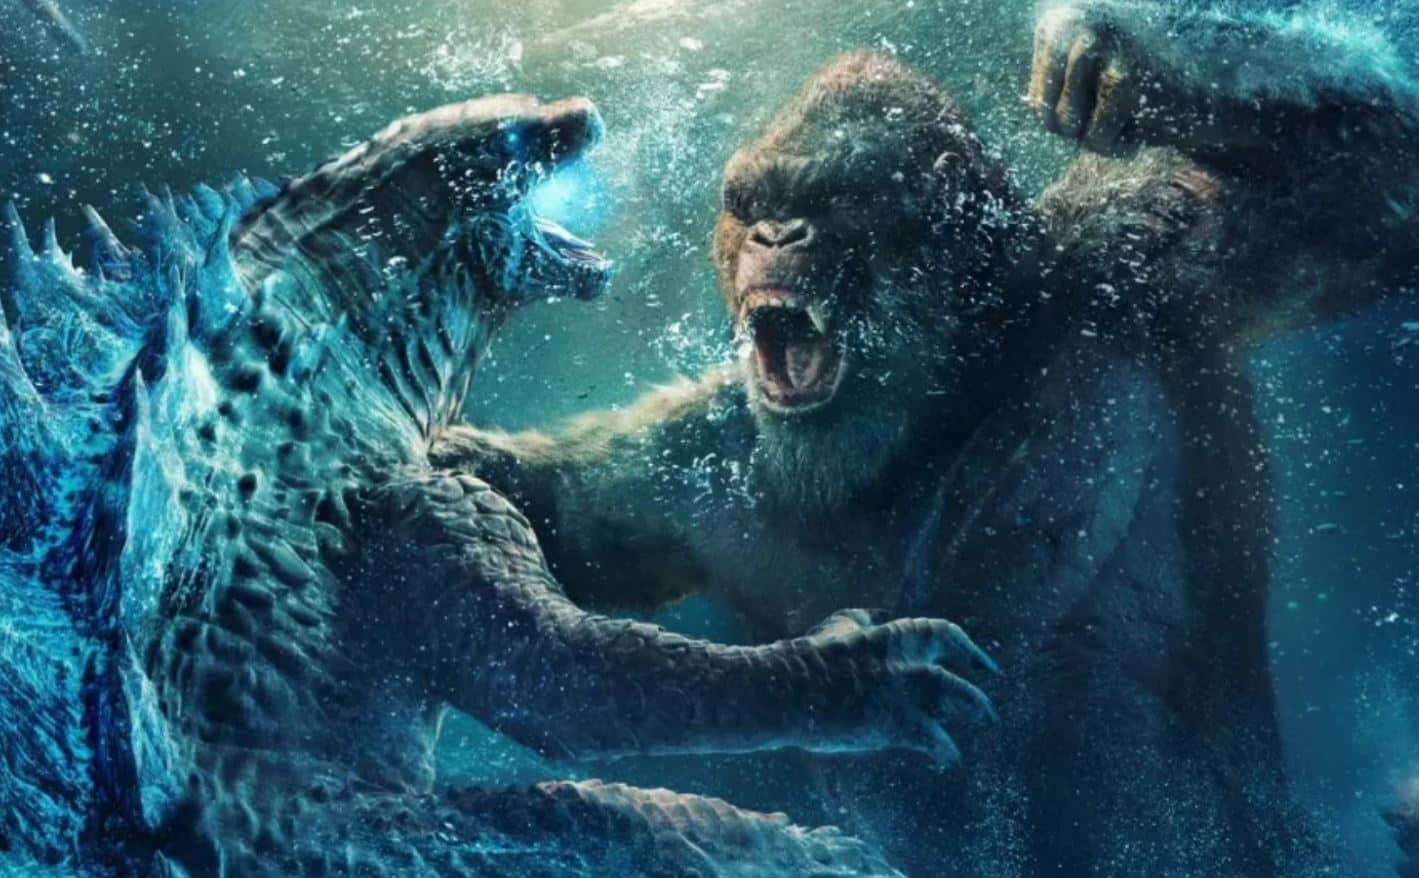 Godzilla Vs Kong Posters Reveal The Monsters Exact Heights